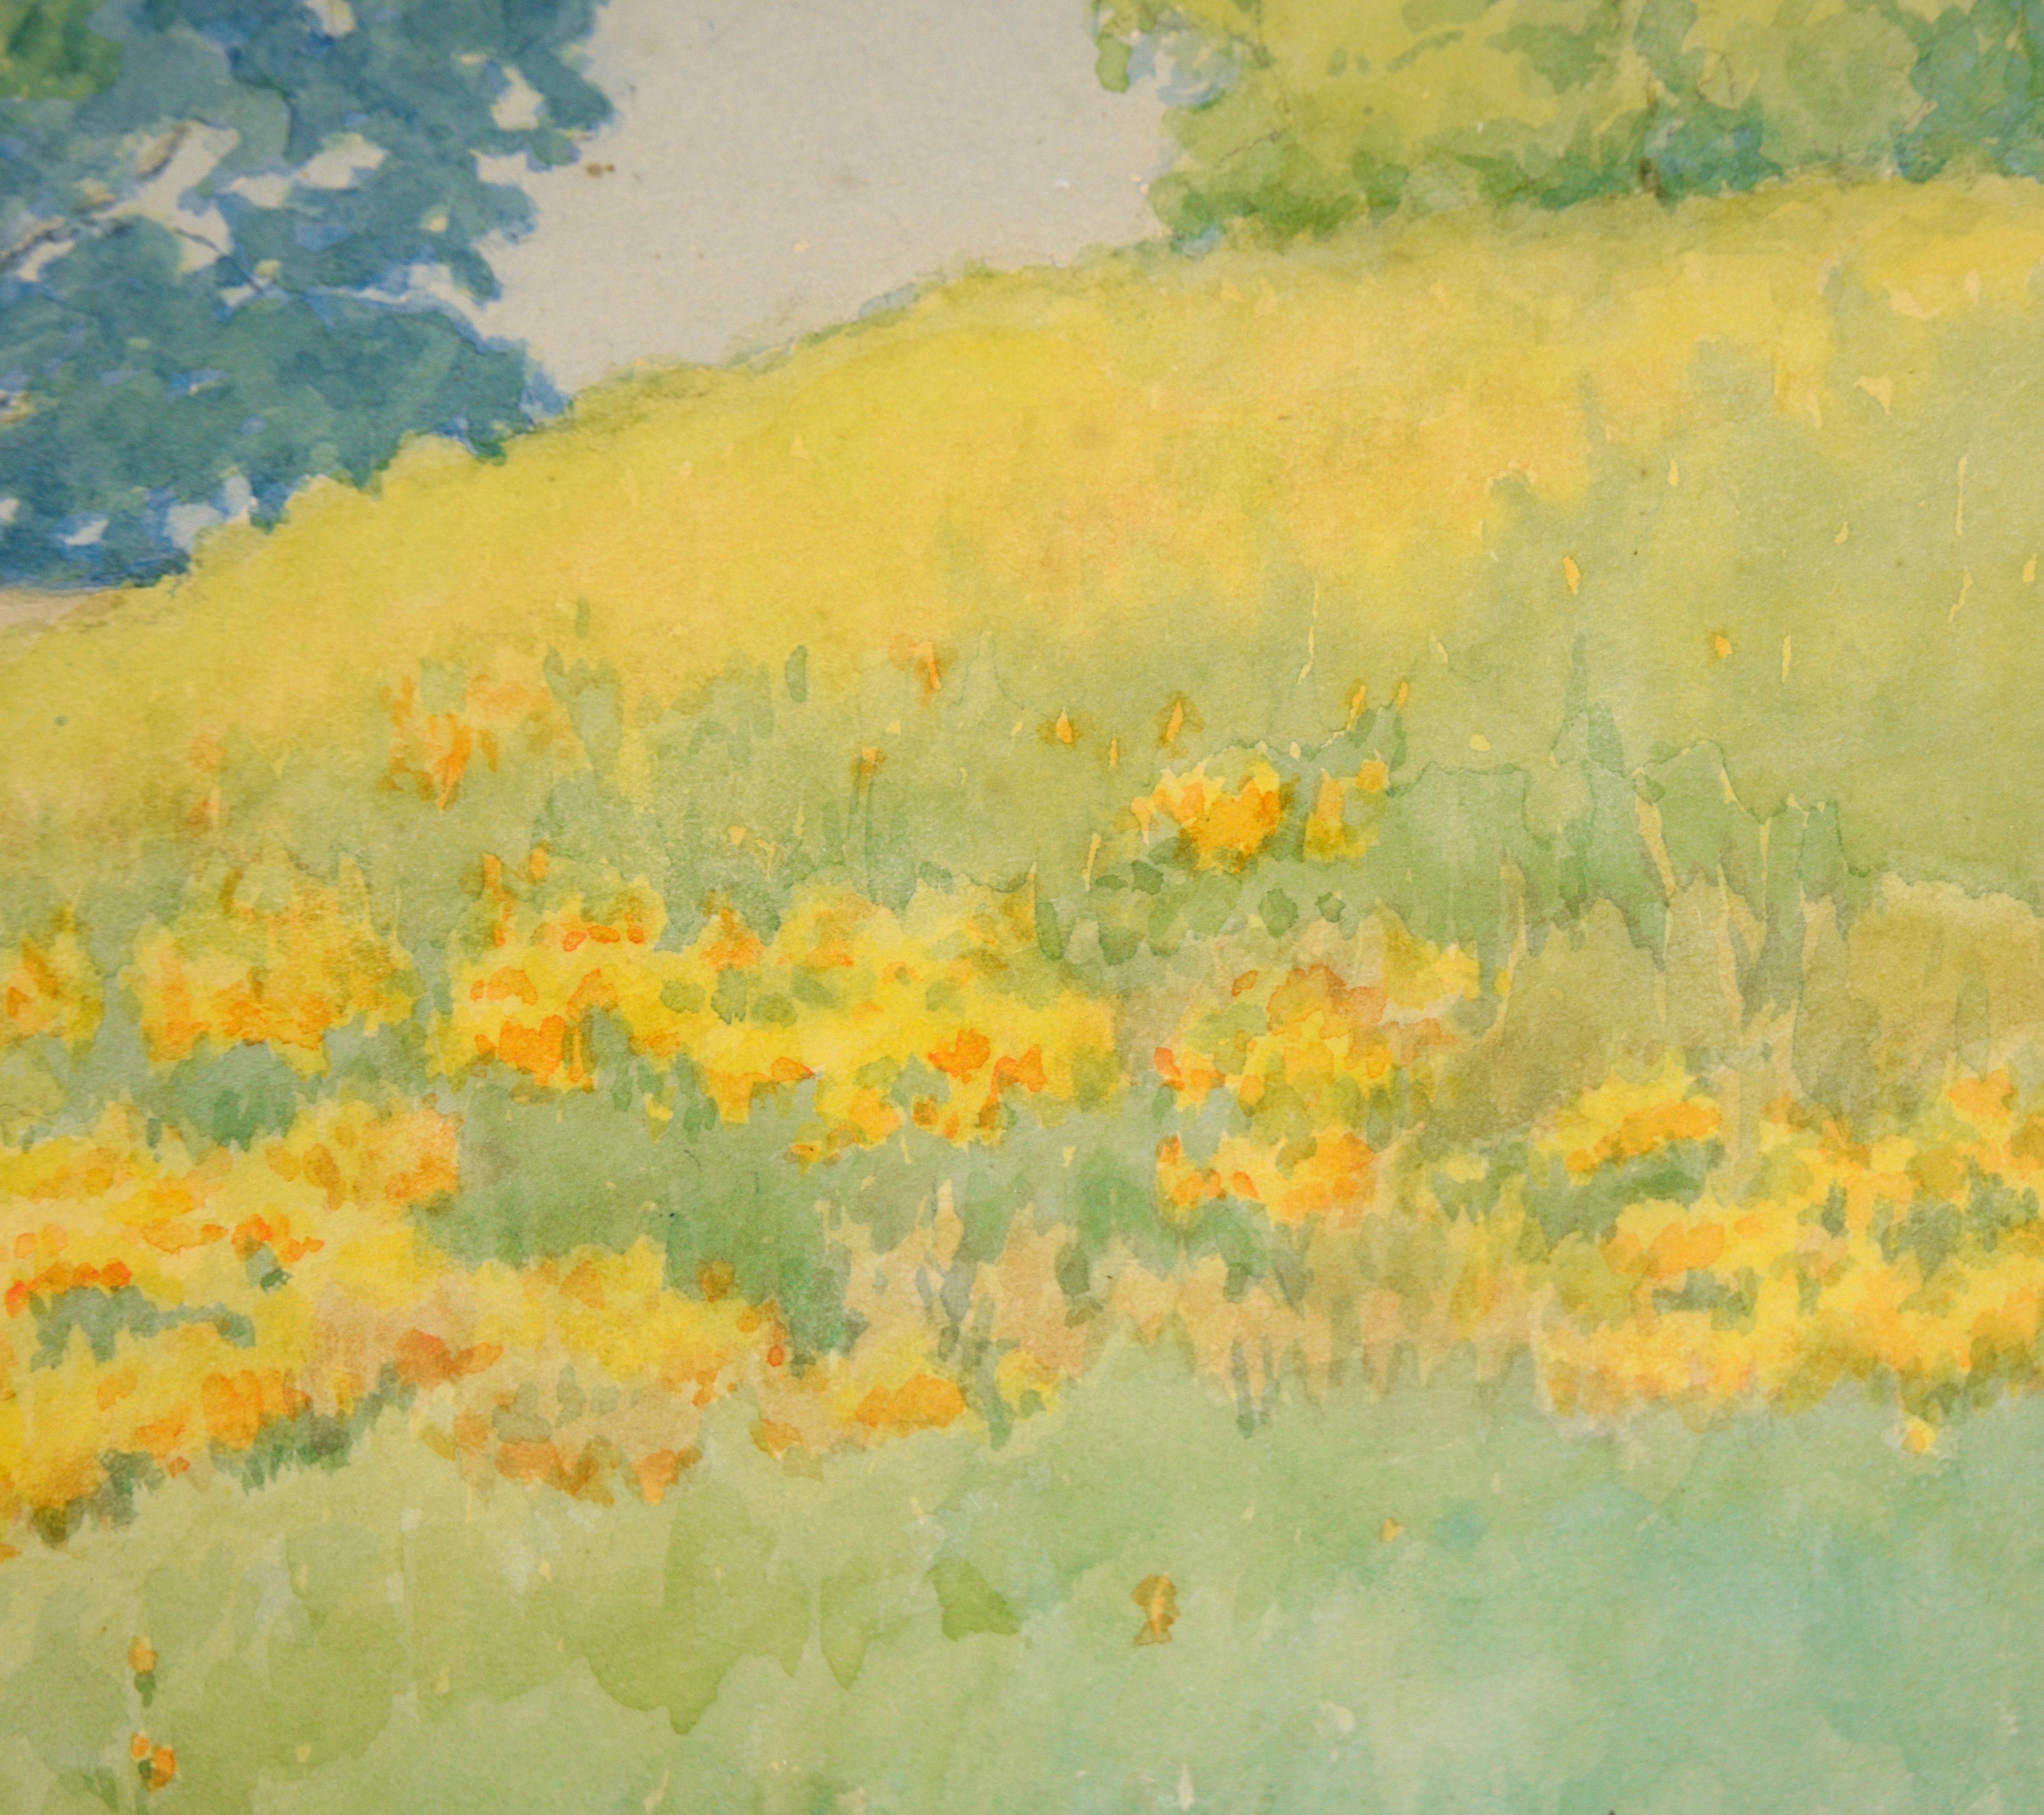 California Golden Poppies and Blue Oaks - Rural Landscape in Watercolor on Paper For Sale 4